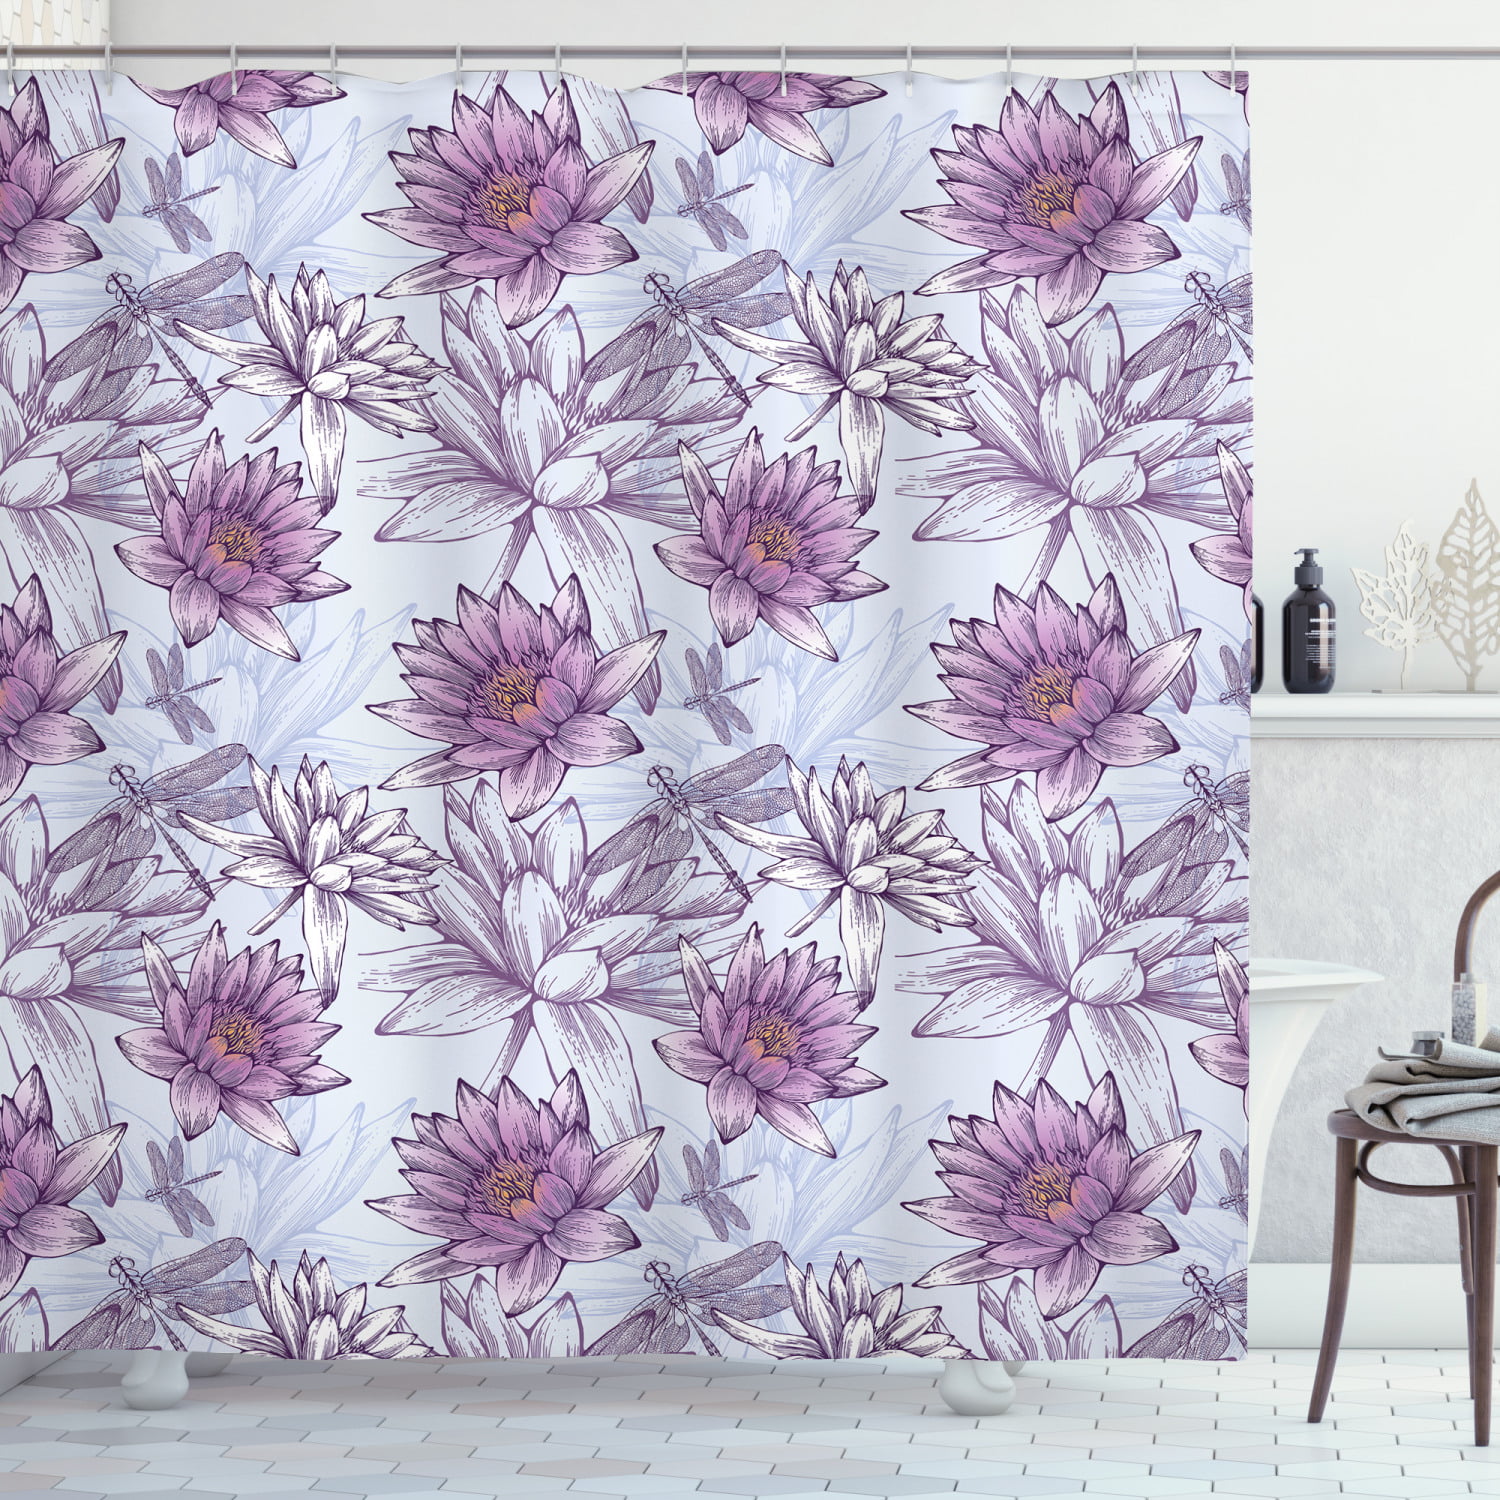 Floral Picture Fabric Shower Curtain set Lotus Dragonfly Bathroom Curtain 71Inch 